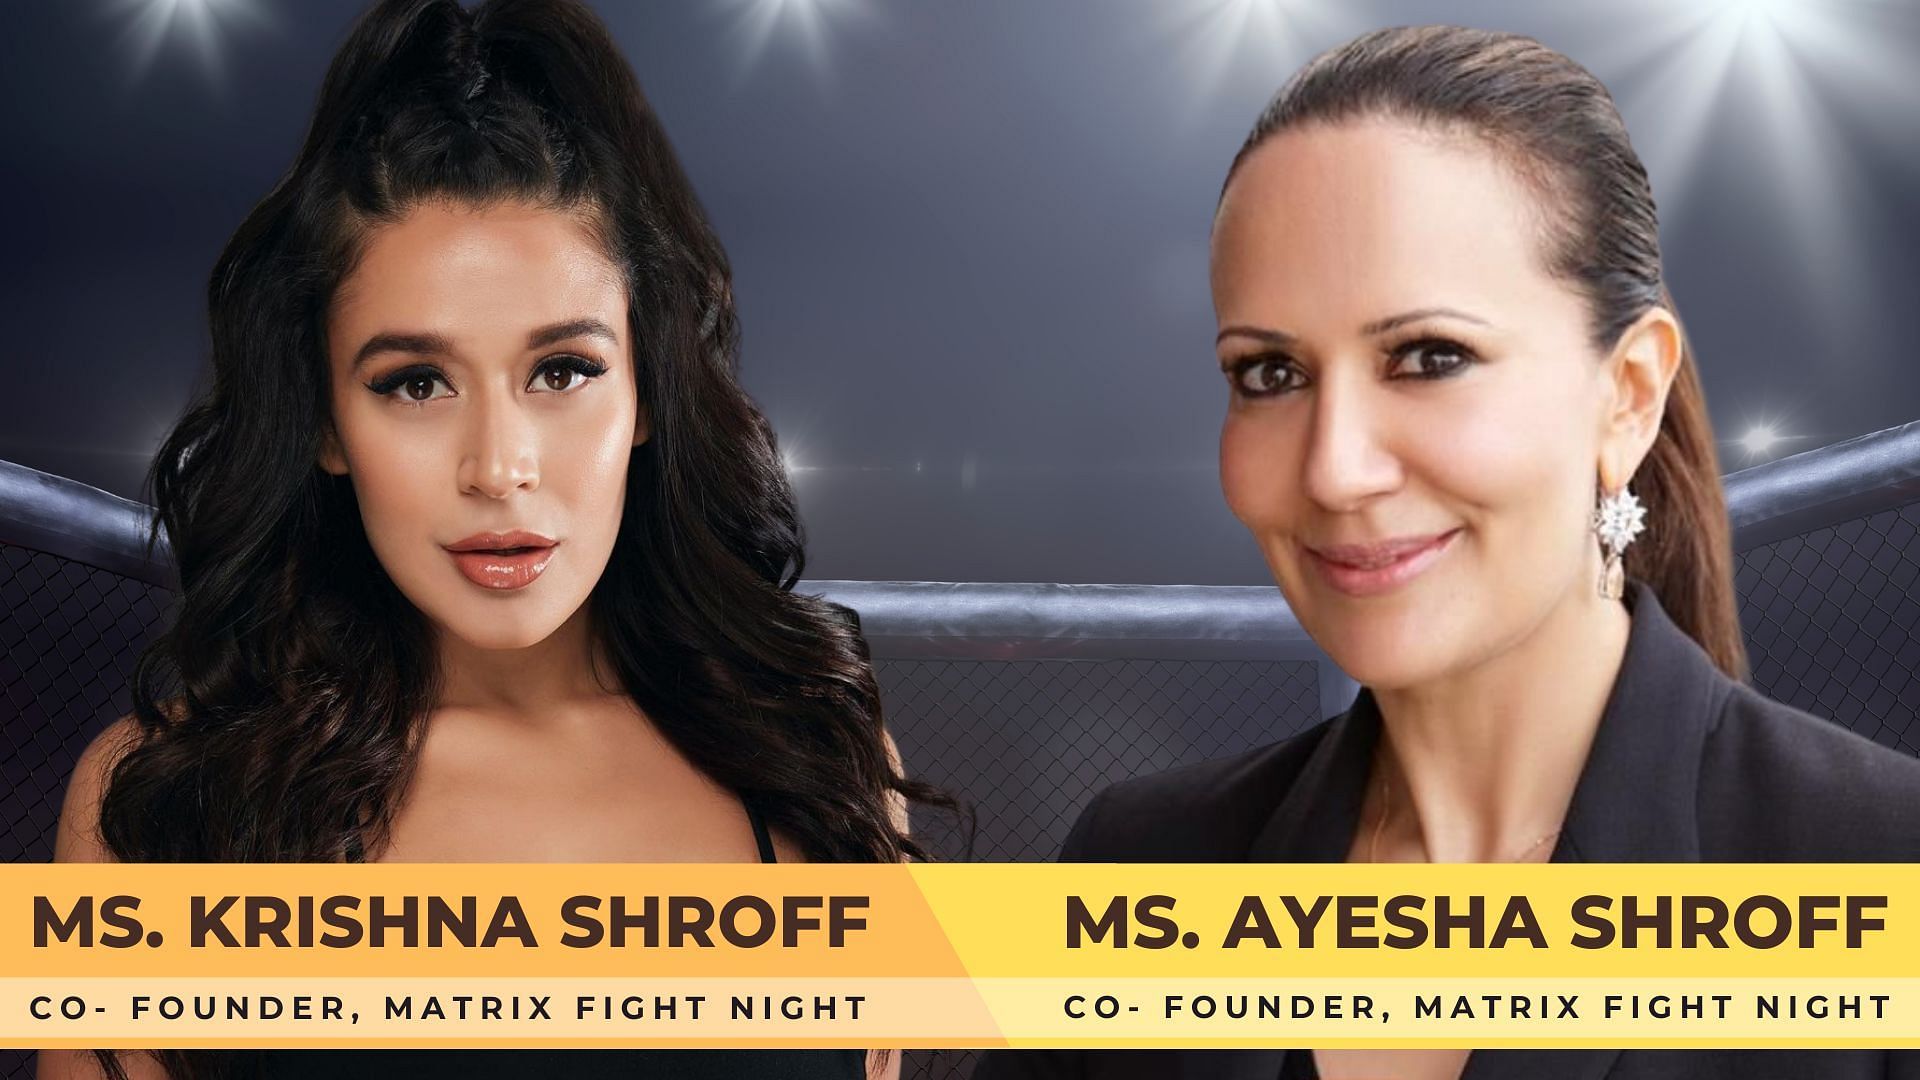 &quot;People are gradually understanding that MMA is not just a street fight but a legitimate sport&quot;- Ms.Krishna Shroff, Co-Founder, Matrix Fight Night